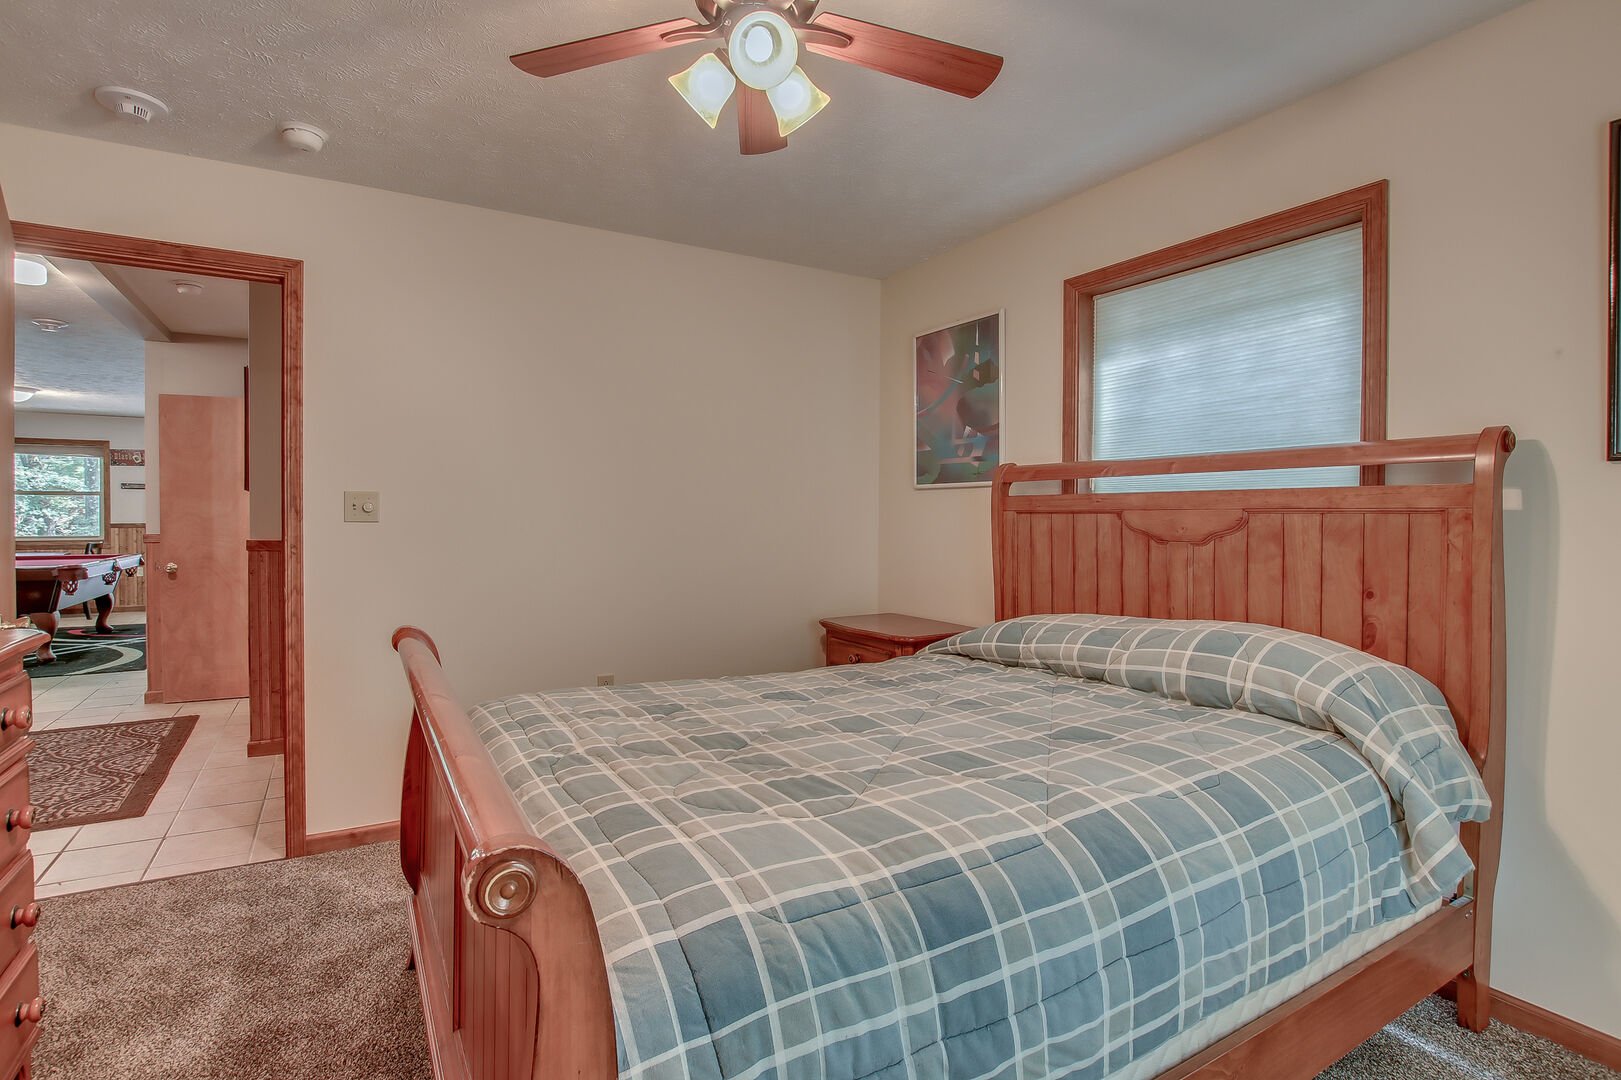 A picture of a bed in the center of a bedroom, with a door open to the game room of this Lake Harmony rental.